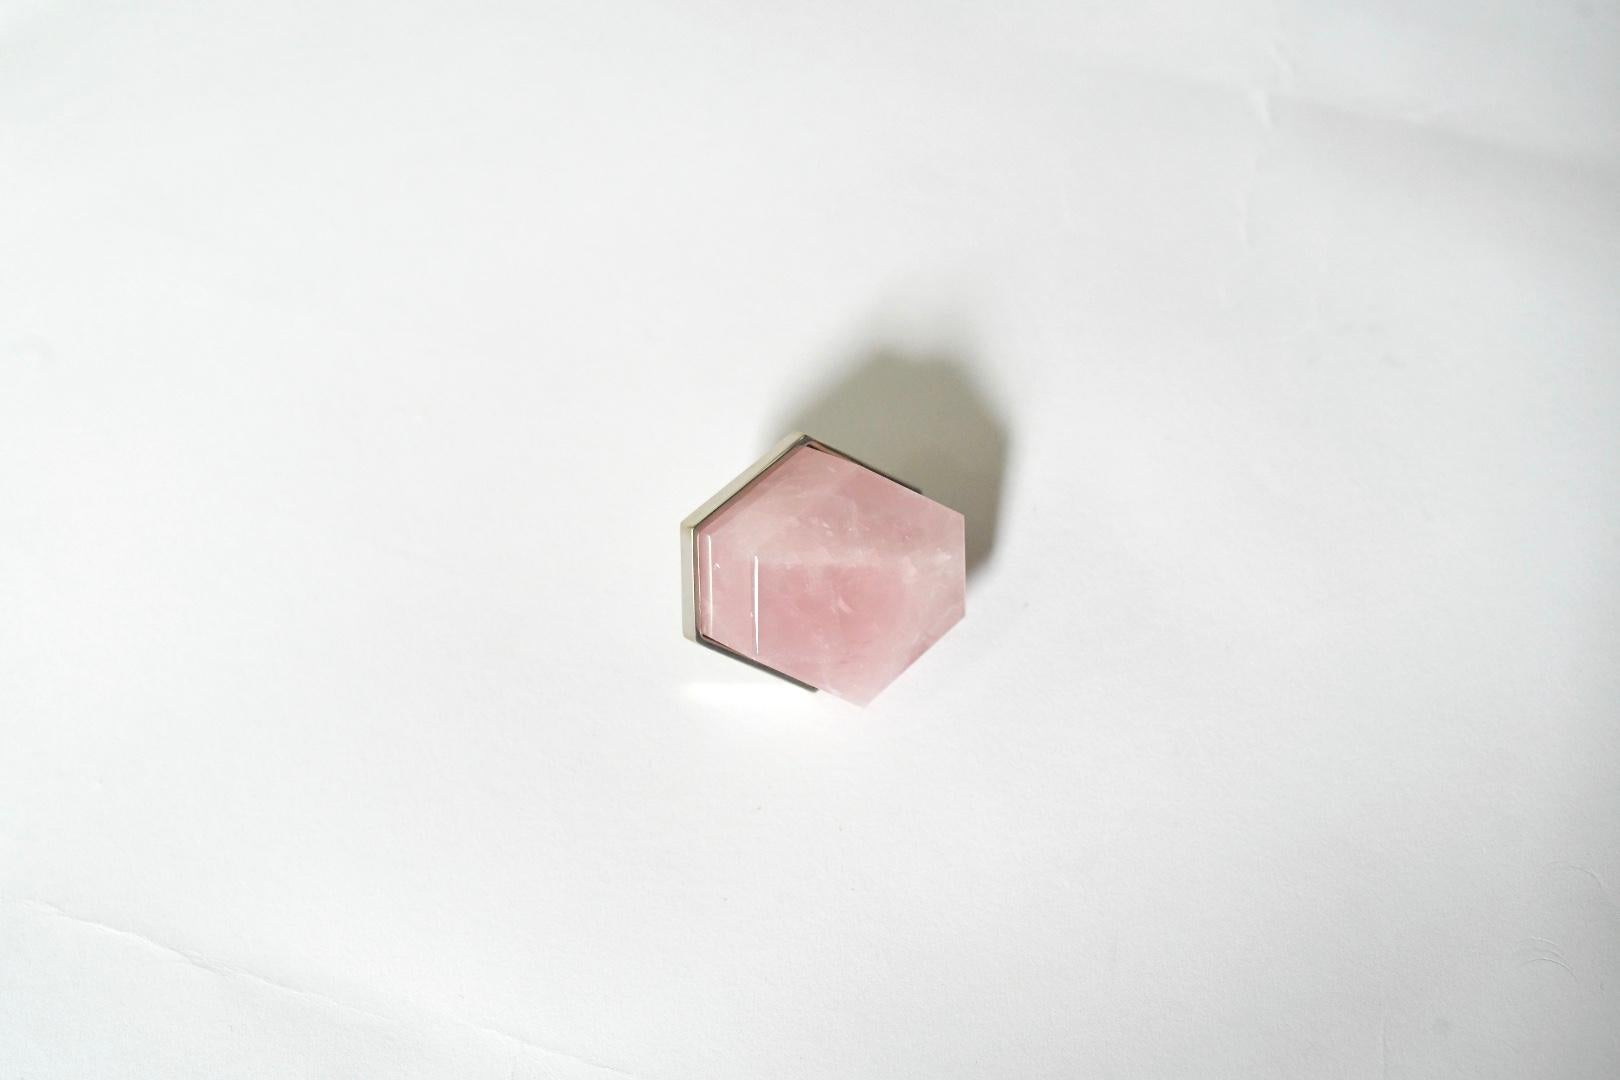 Rock Crystal Quartz Knob by Phoenix In Excellent Condition For Sale In New York, NY